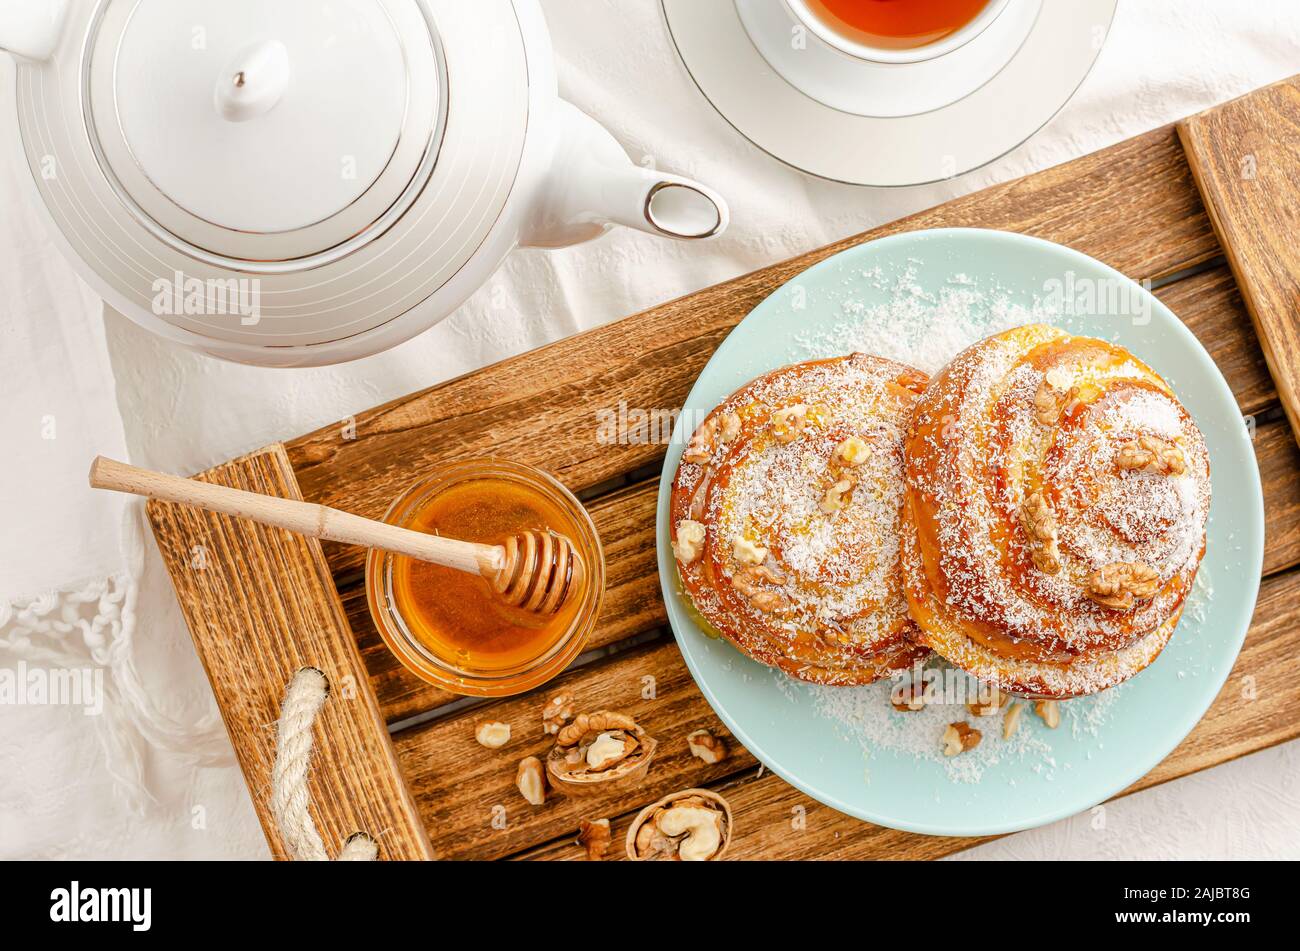 Sweet buns with walnuts, grated coconut and honey on a wooden tray. Breakfast concept. Top view, flat lay. Stock Photo